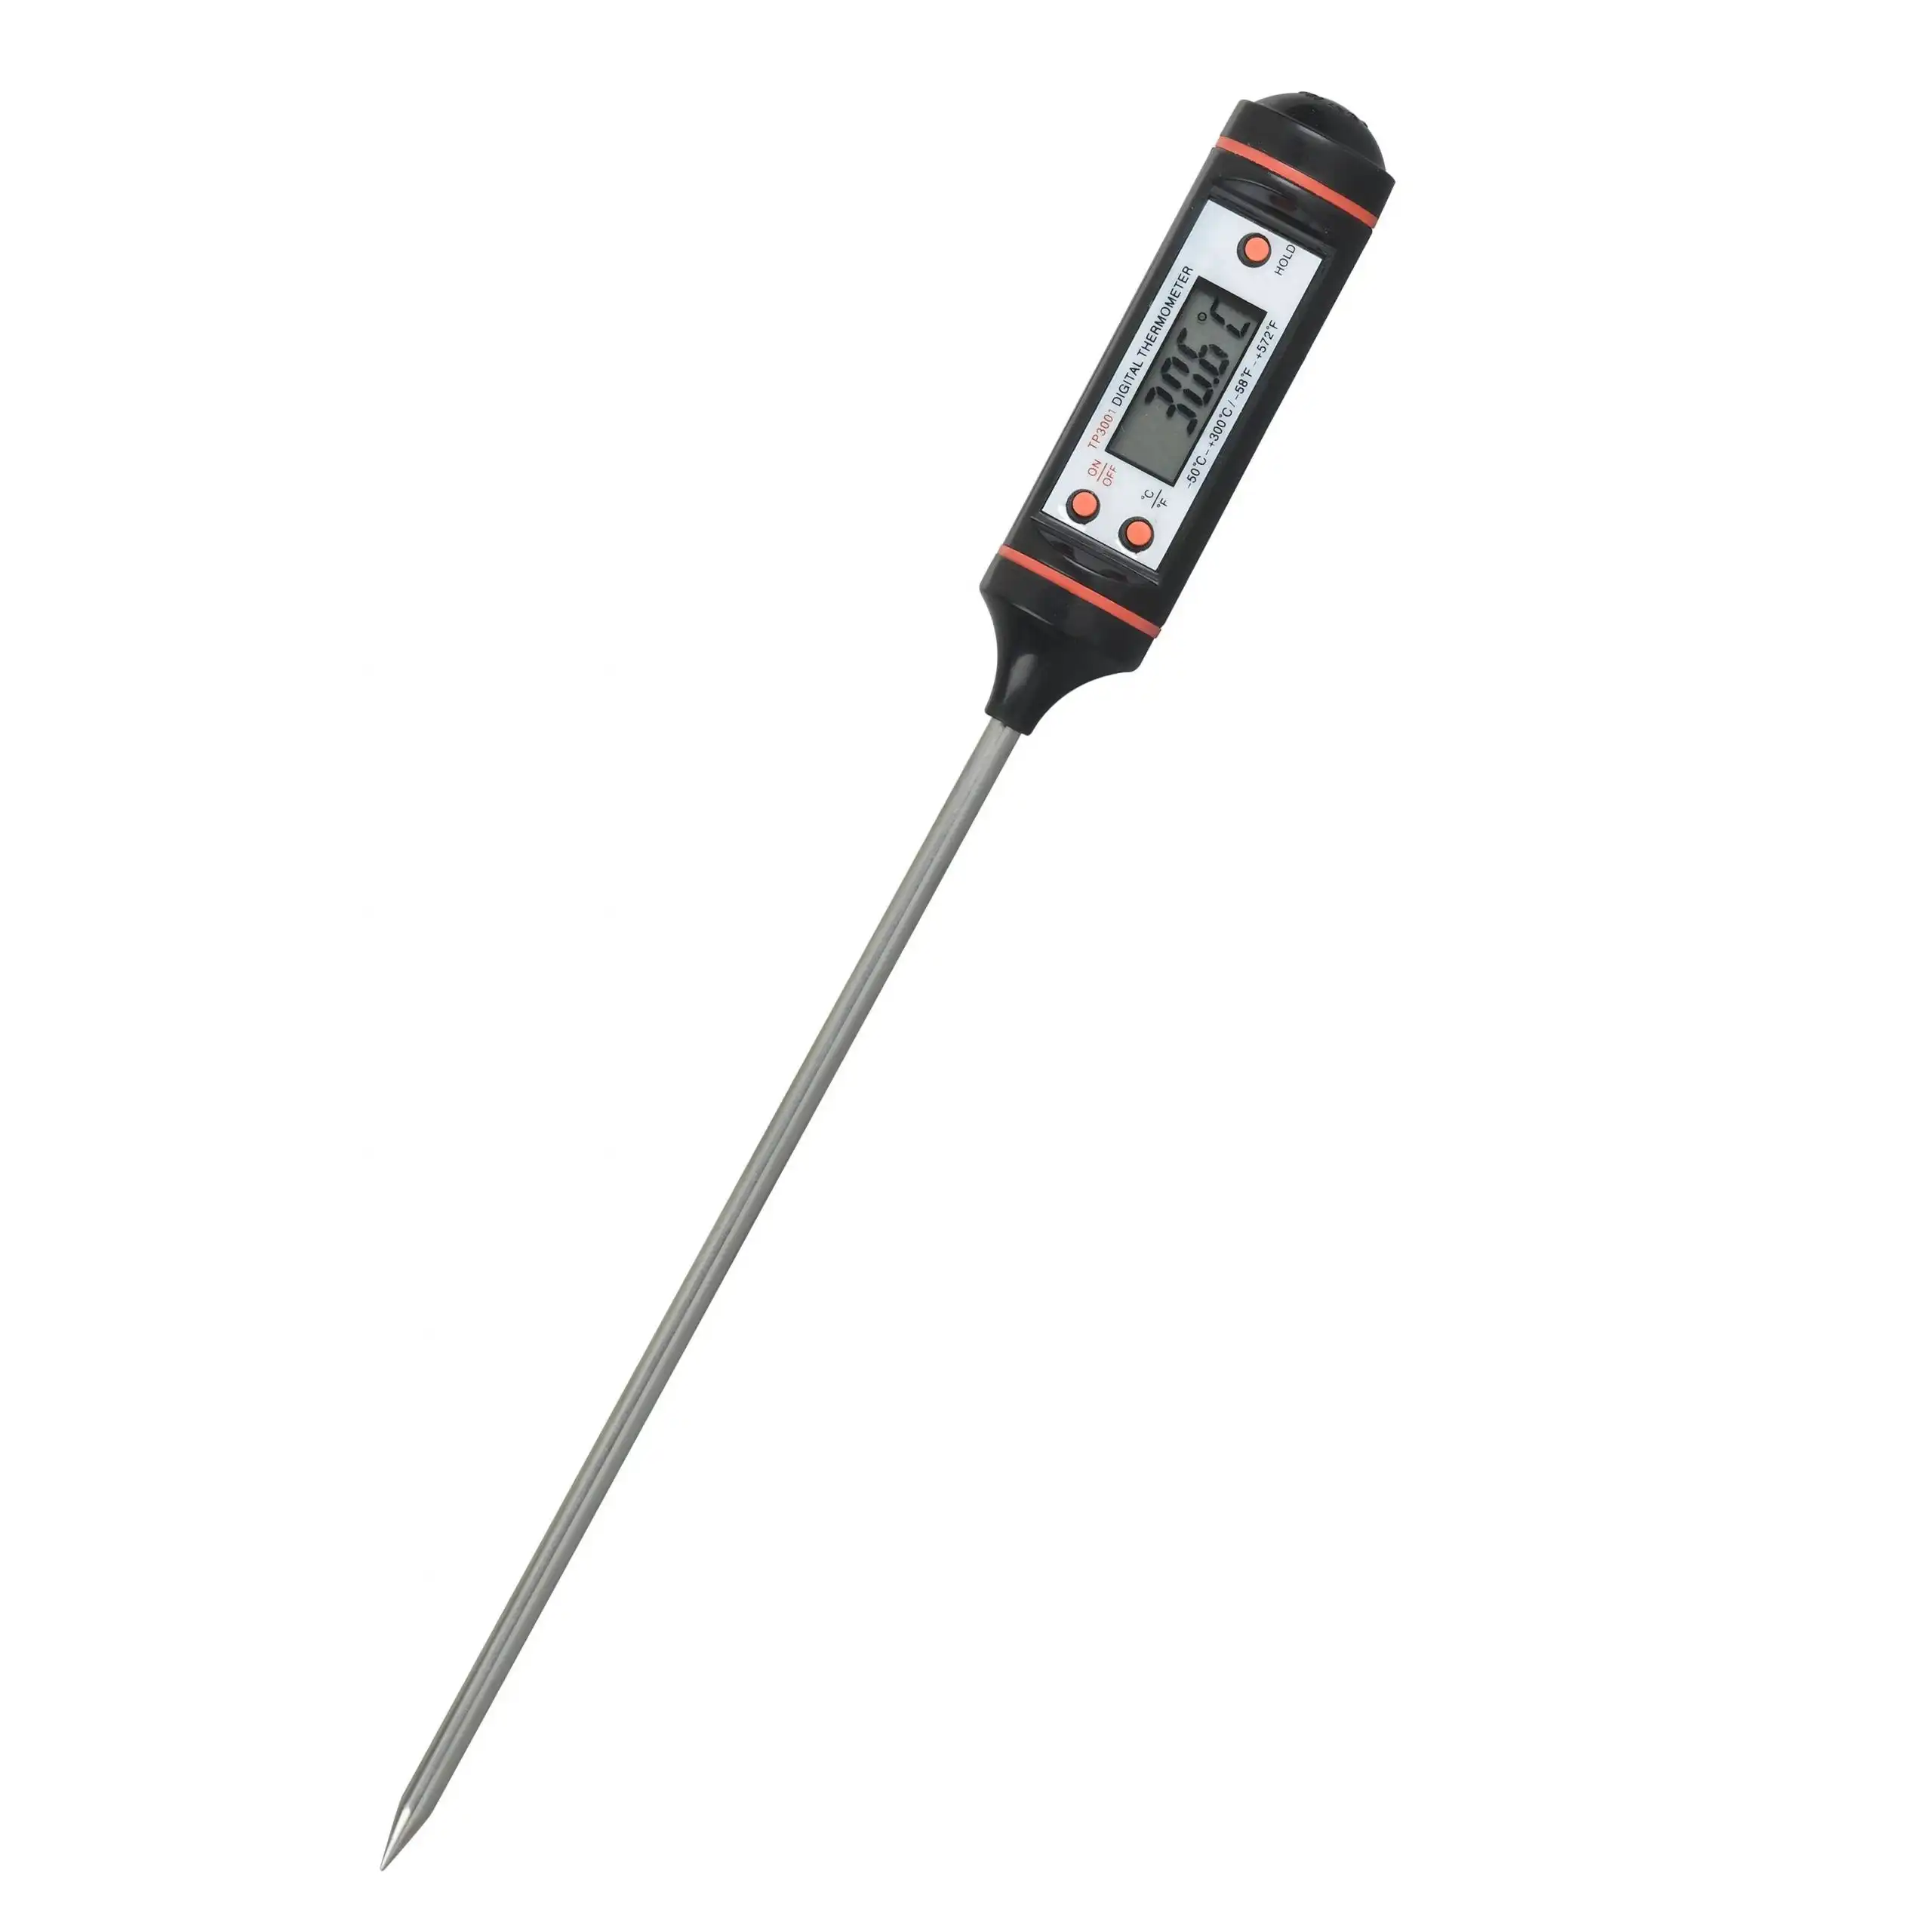 TODO Digital Lcd Display Food Thermometer Cooking Temperature Probe Bbq -50°C ~ 300°C Black